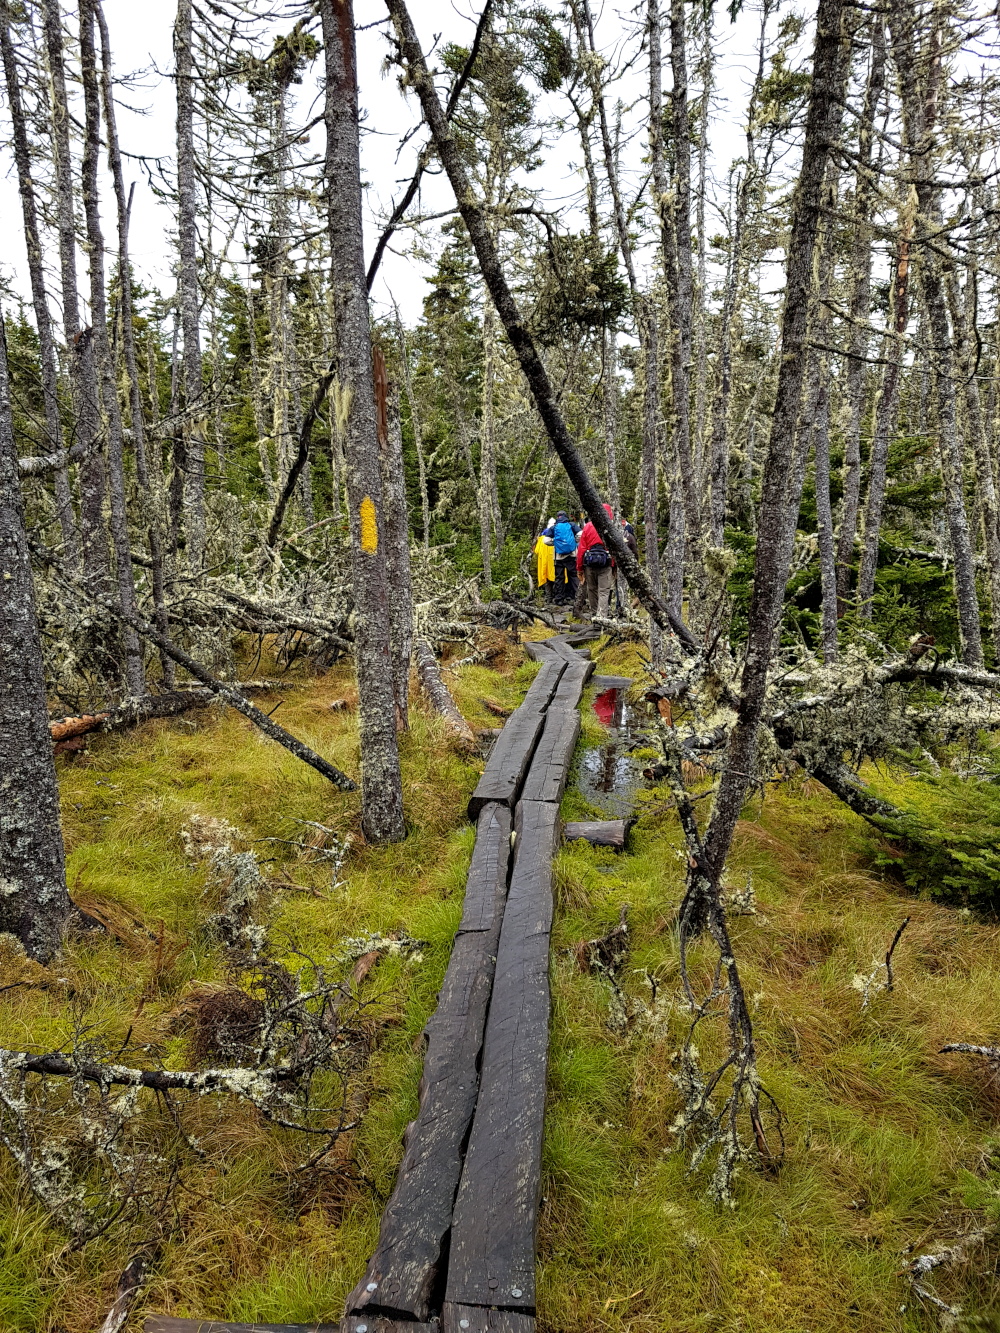 The trail cuts through the forest as it makes its way to the cliffs and the look-offs. Damage caused by the many coastal storms is easily apparent.